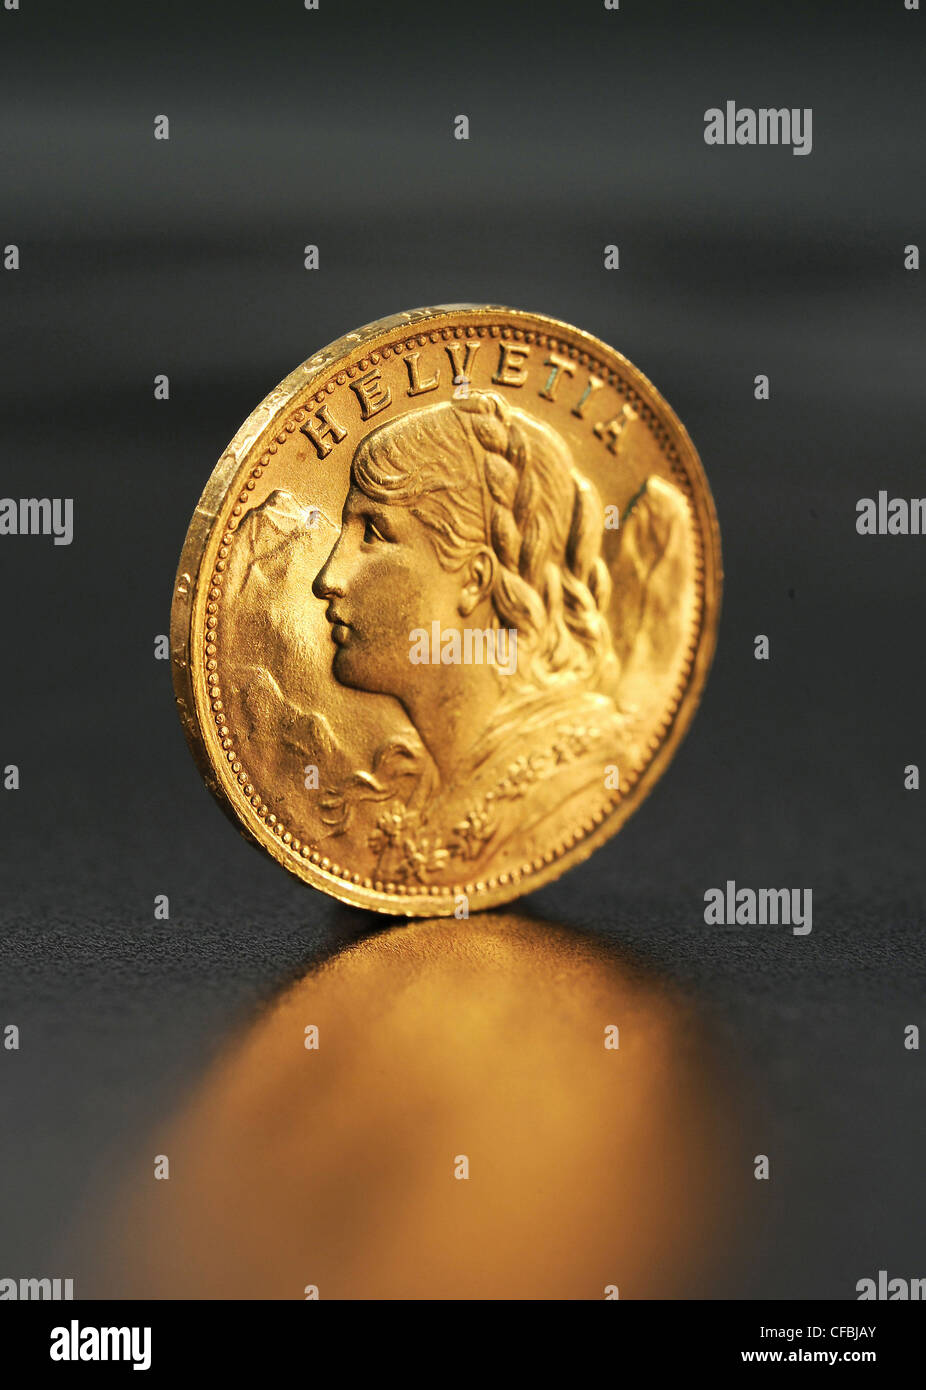 Gold, bank, valuable, value, enclosure, Goldvreneli, brilliant, Switzerland, value, coin, golden coin, save, secure Stock Photo